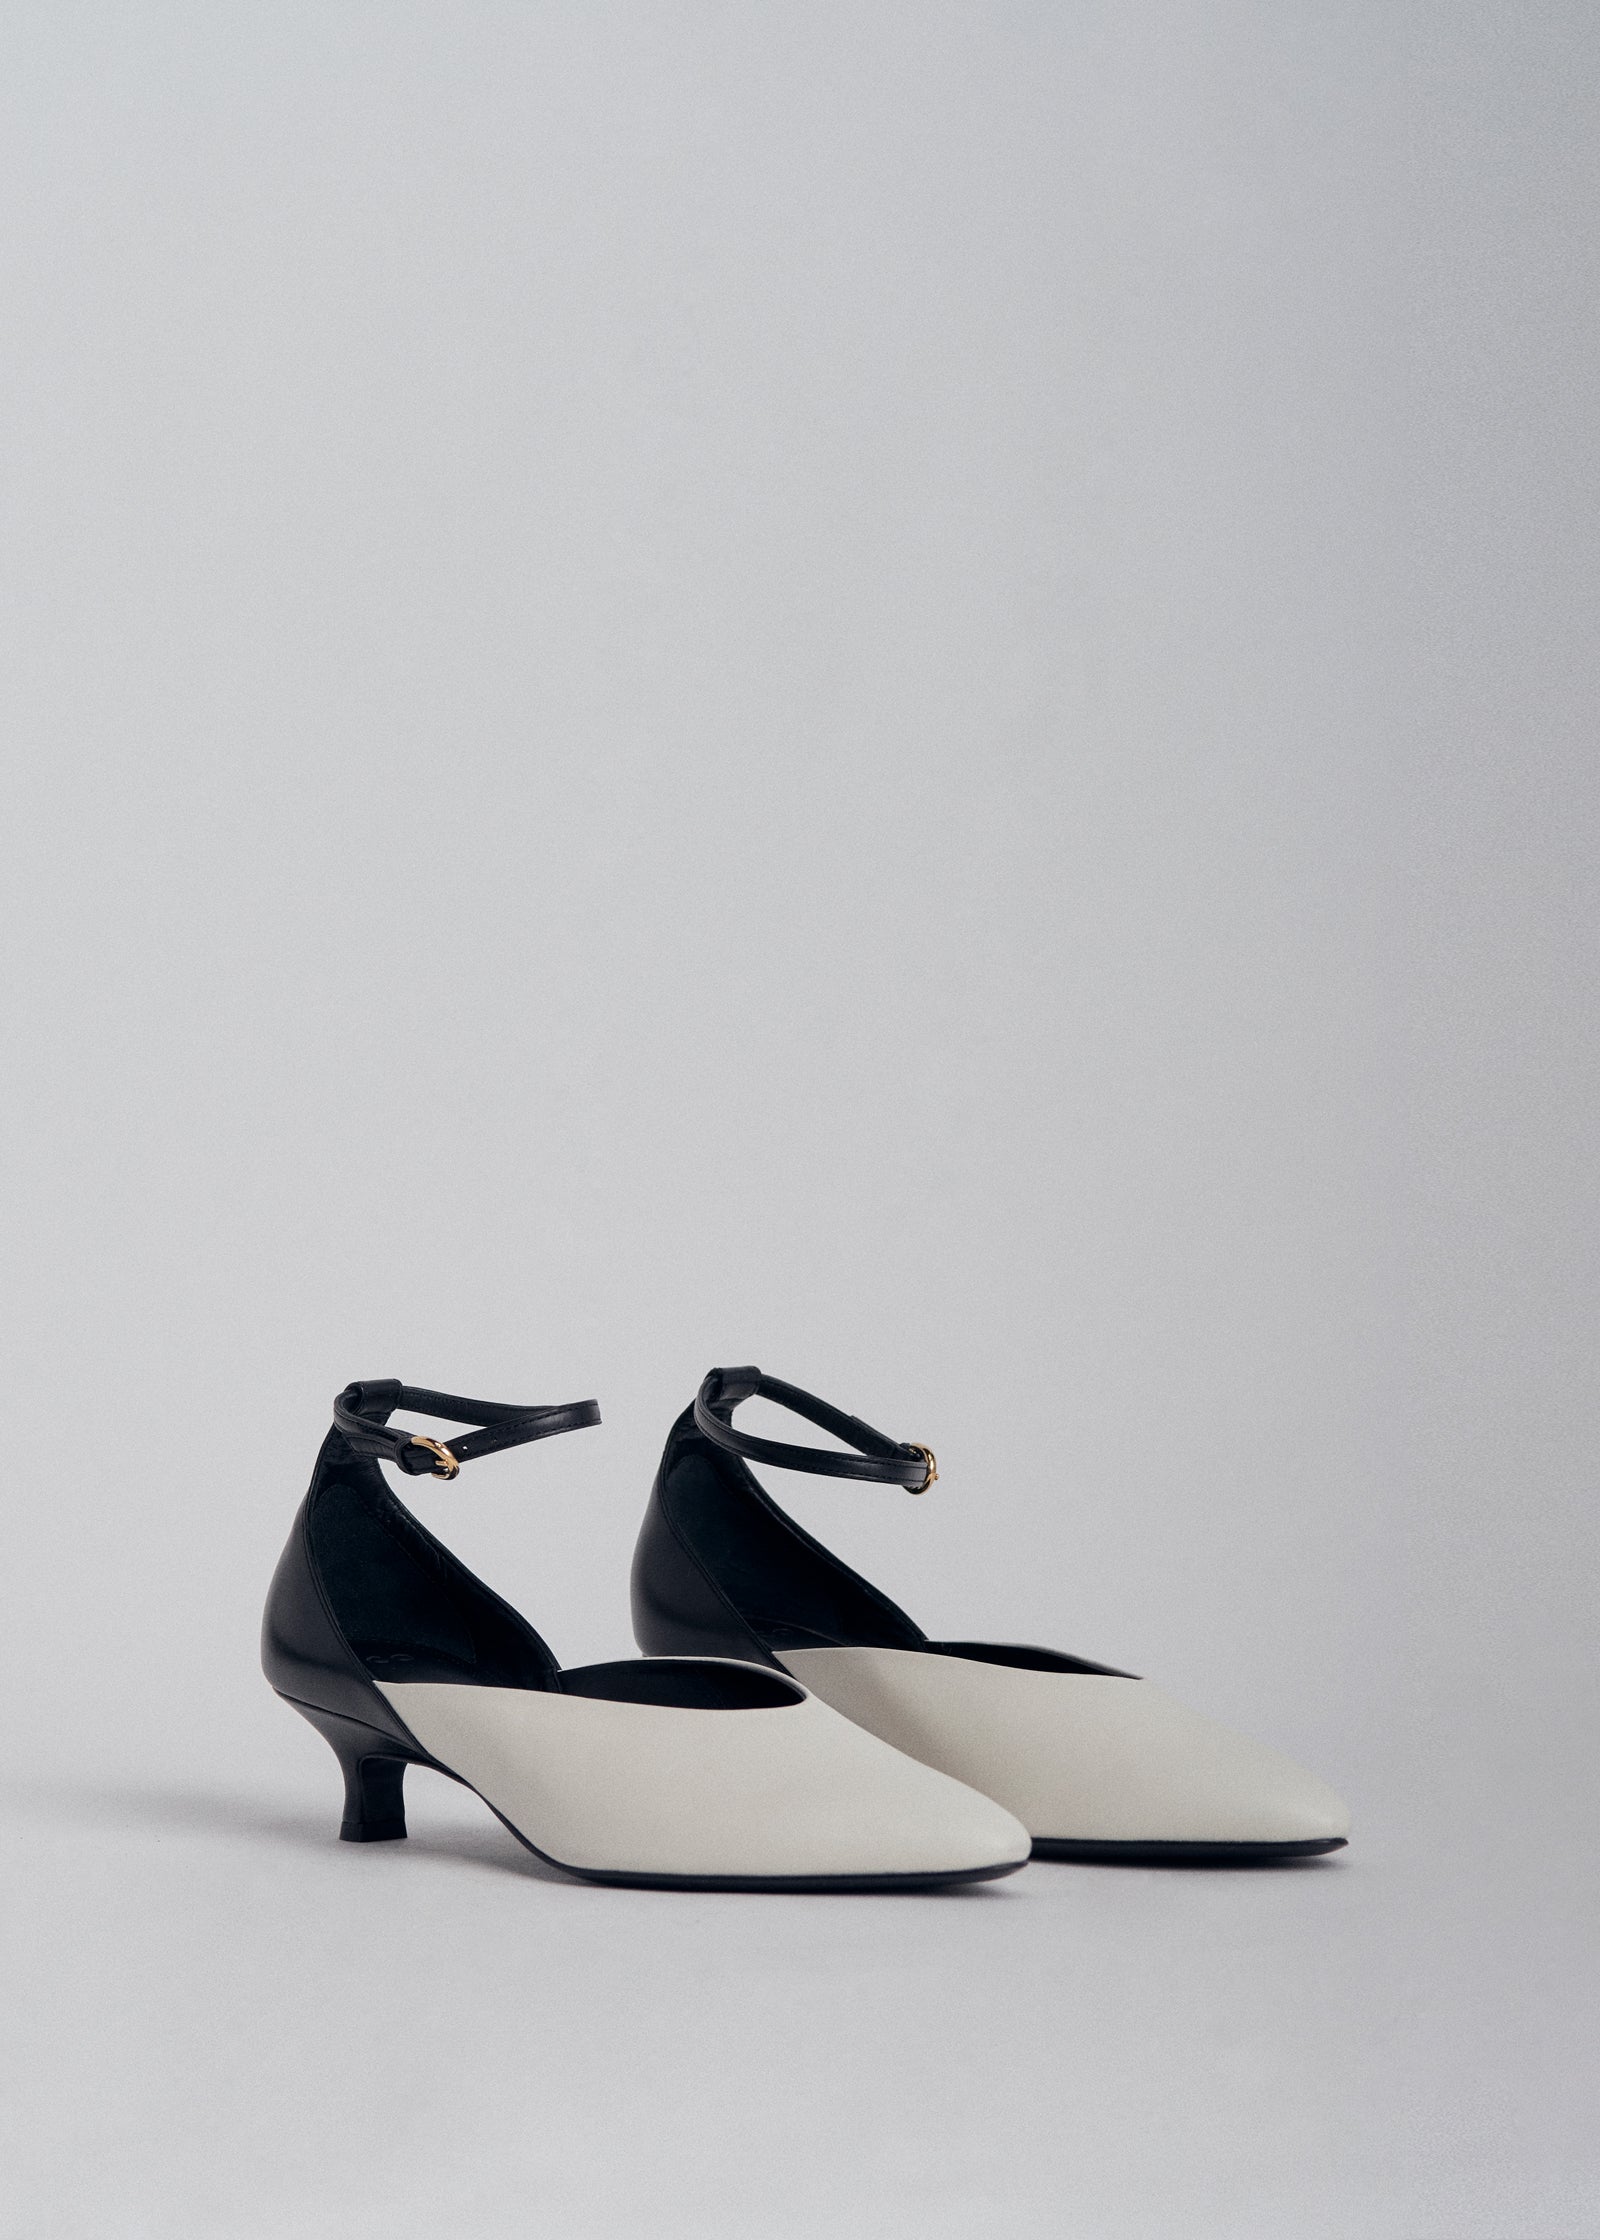 D'Orsay Kitten Heels in Leather -  Ivory - CO Collections